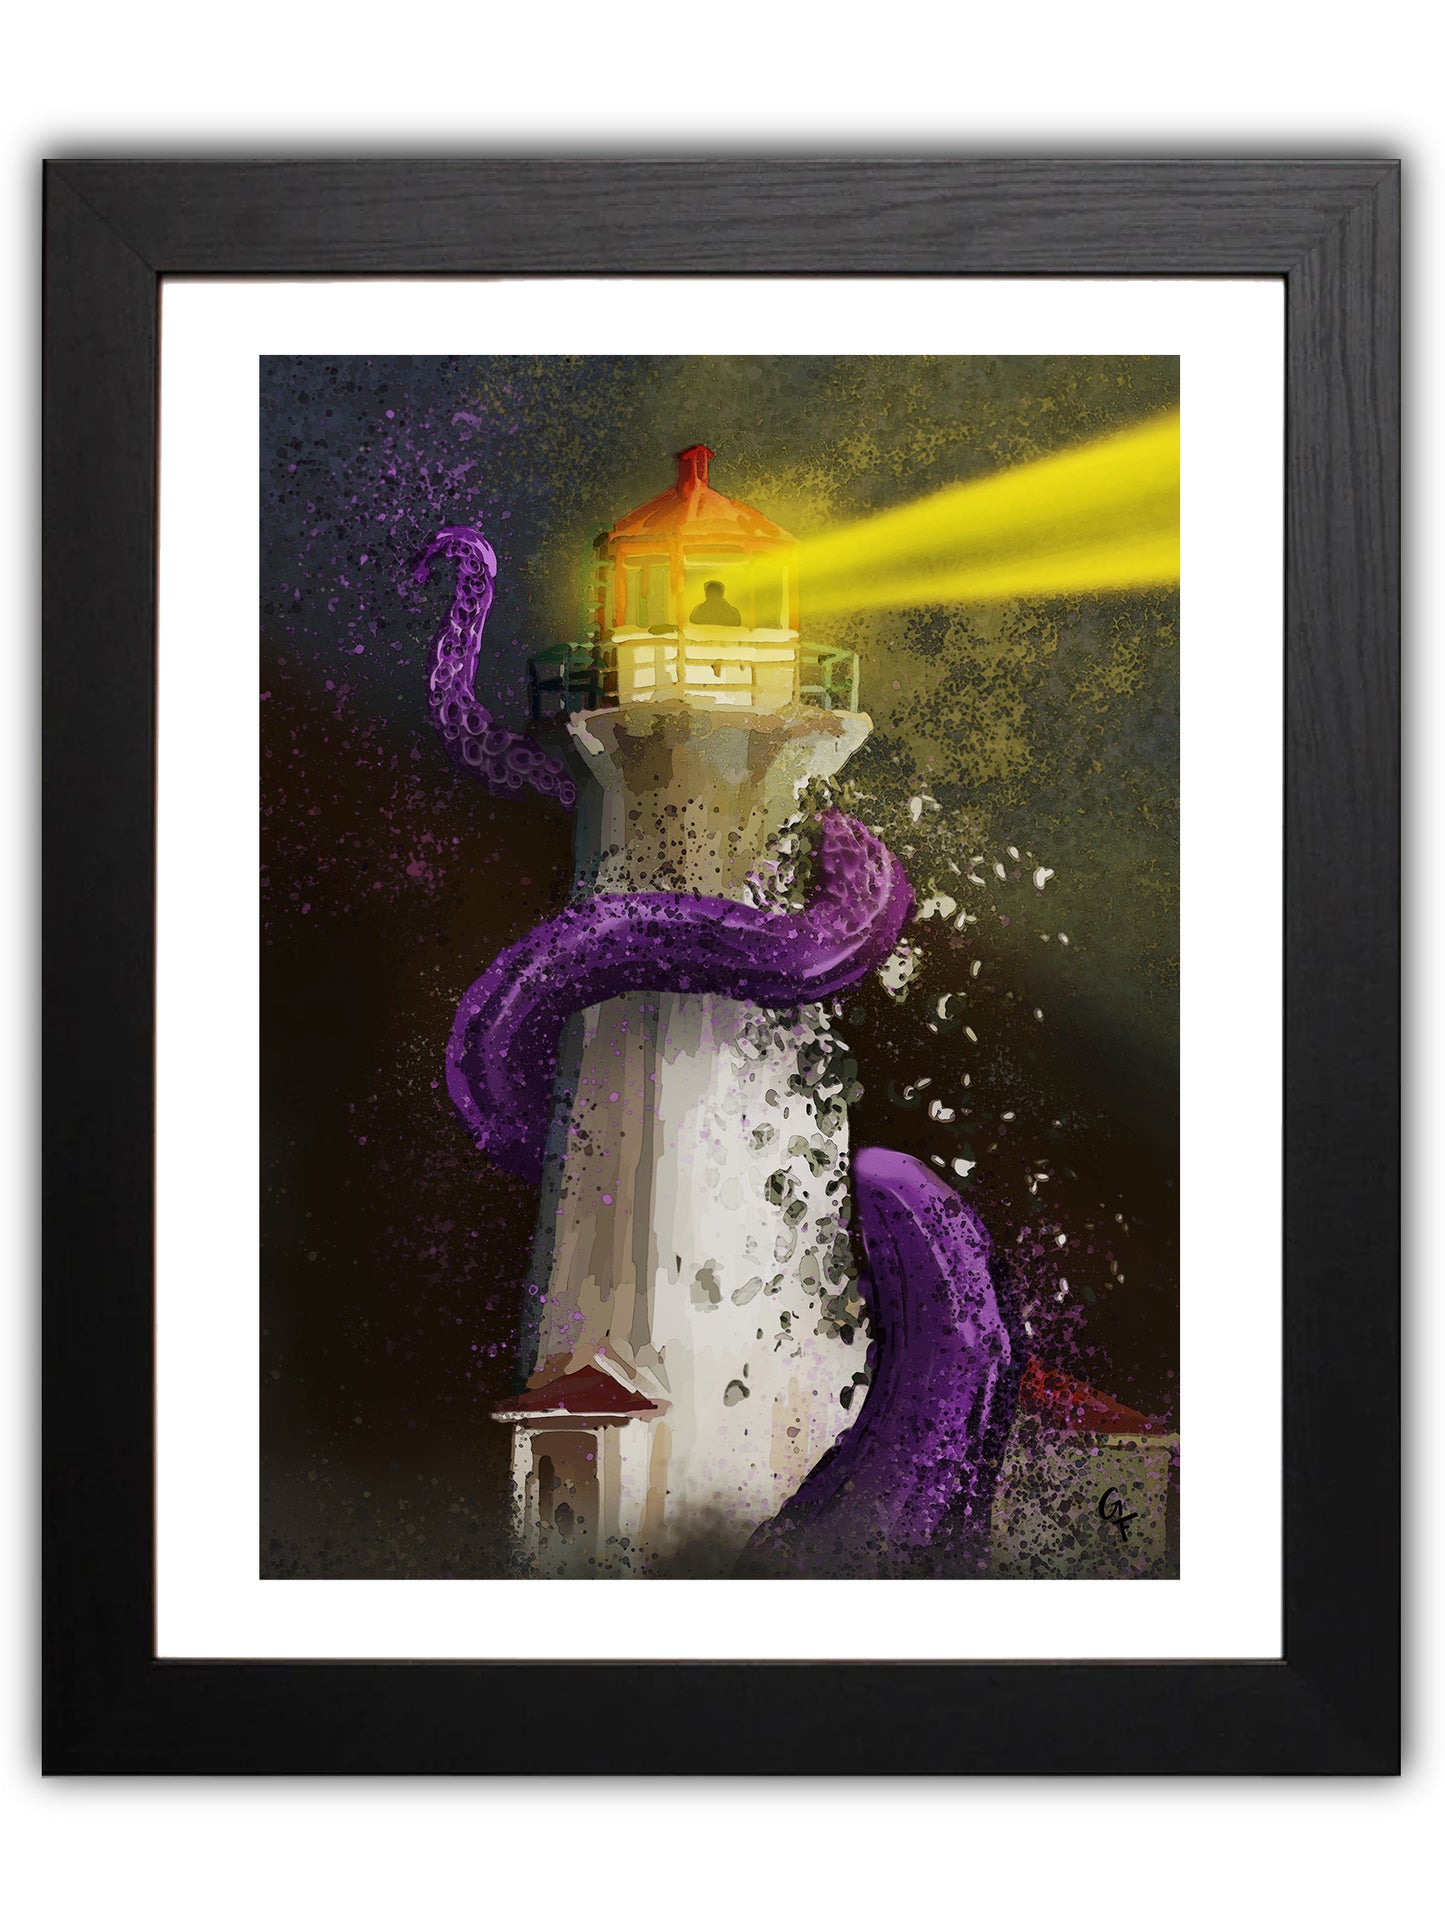 Lighthouse at night, purple tentacle wrapped around